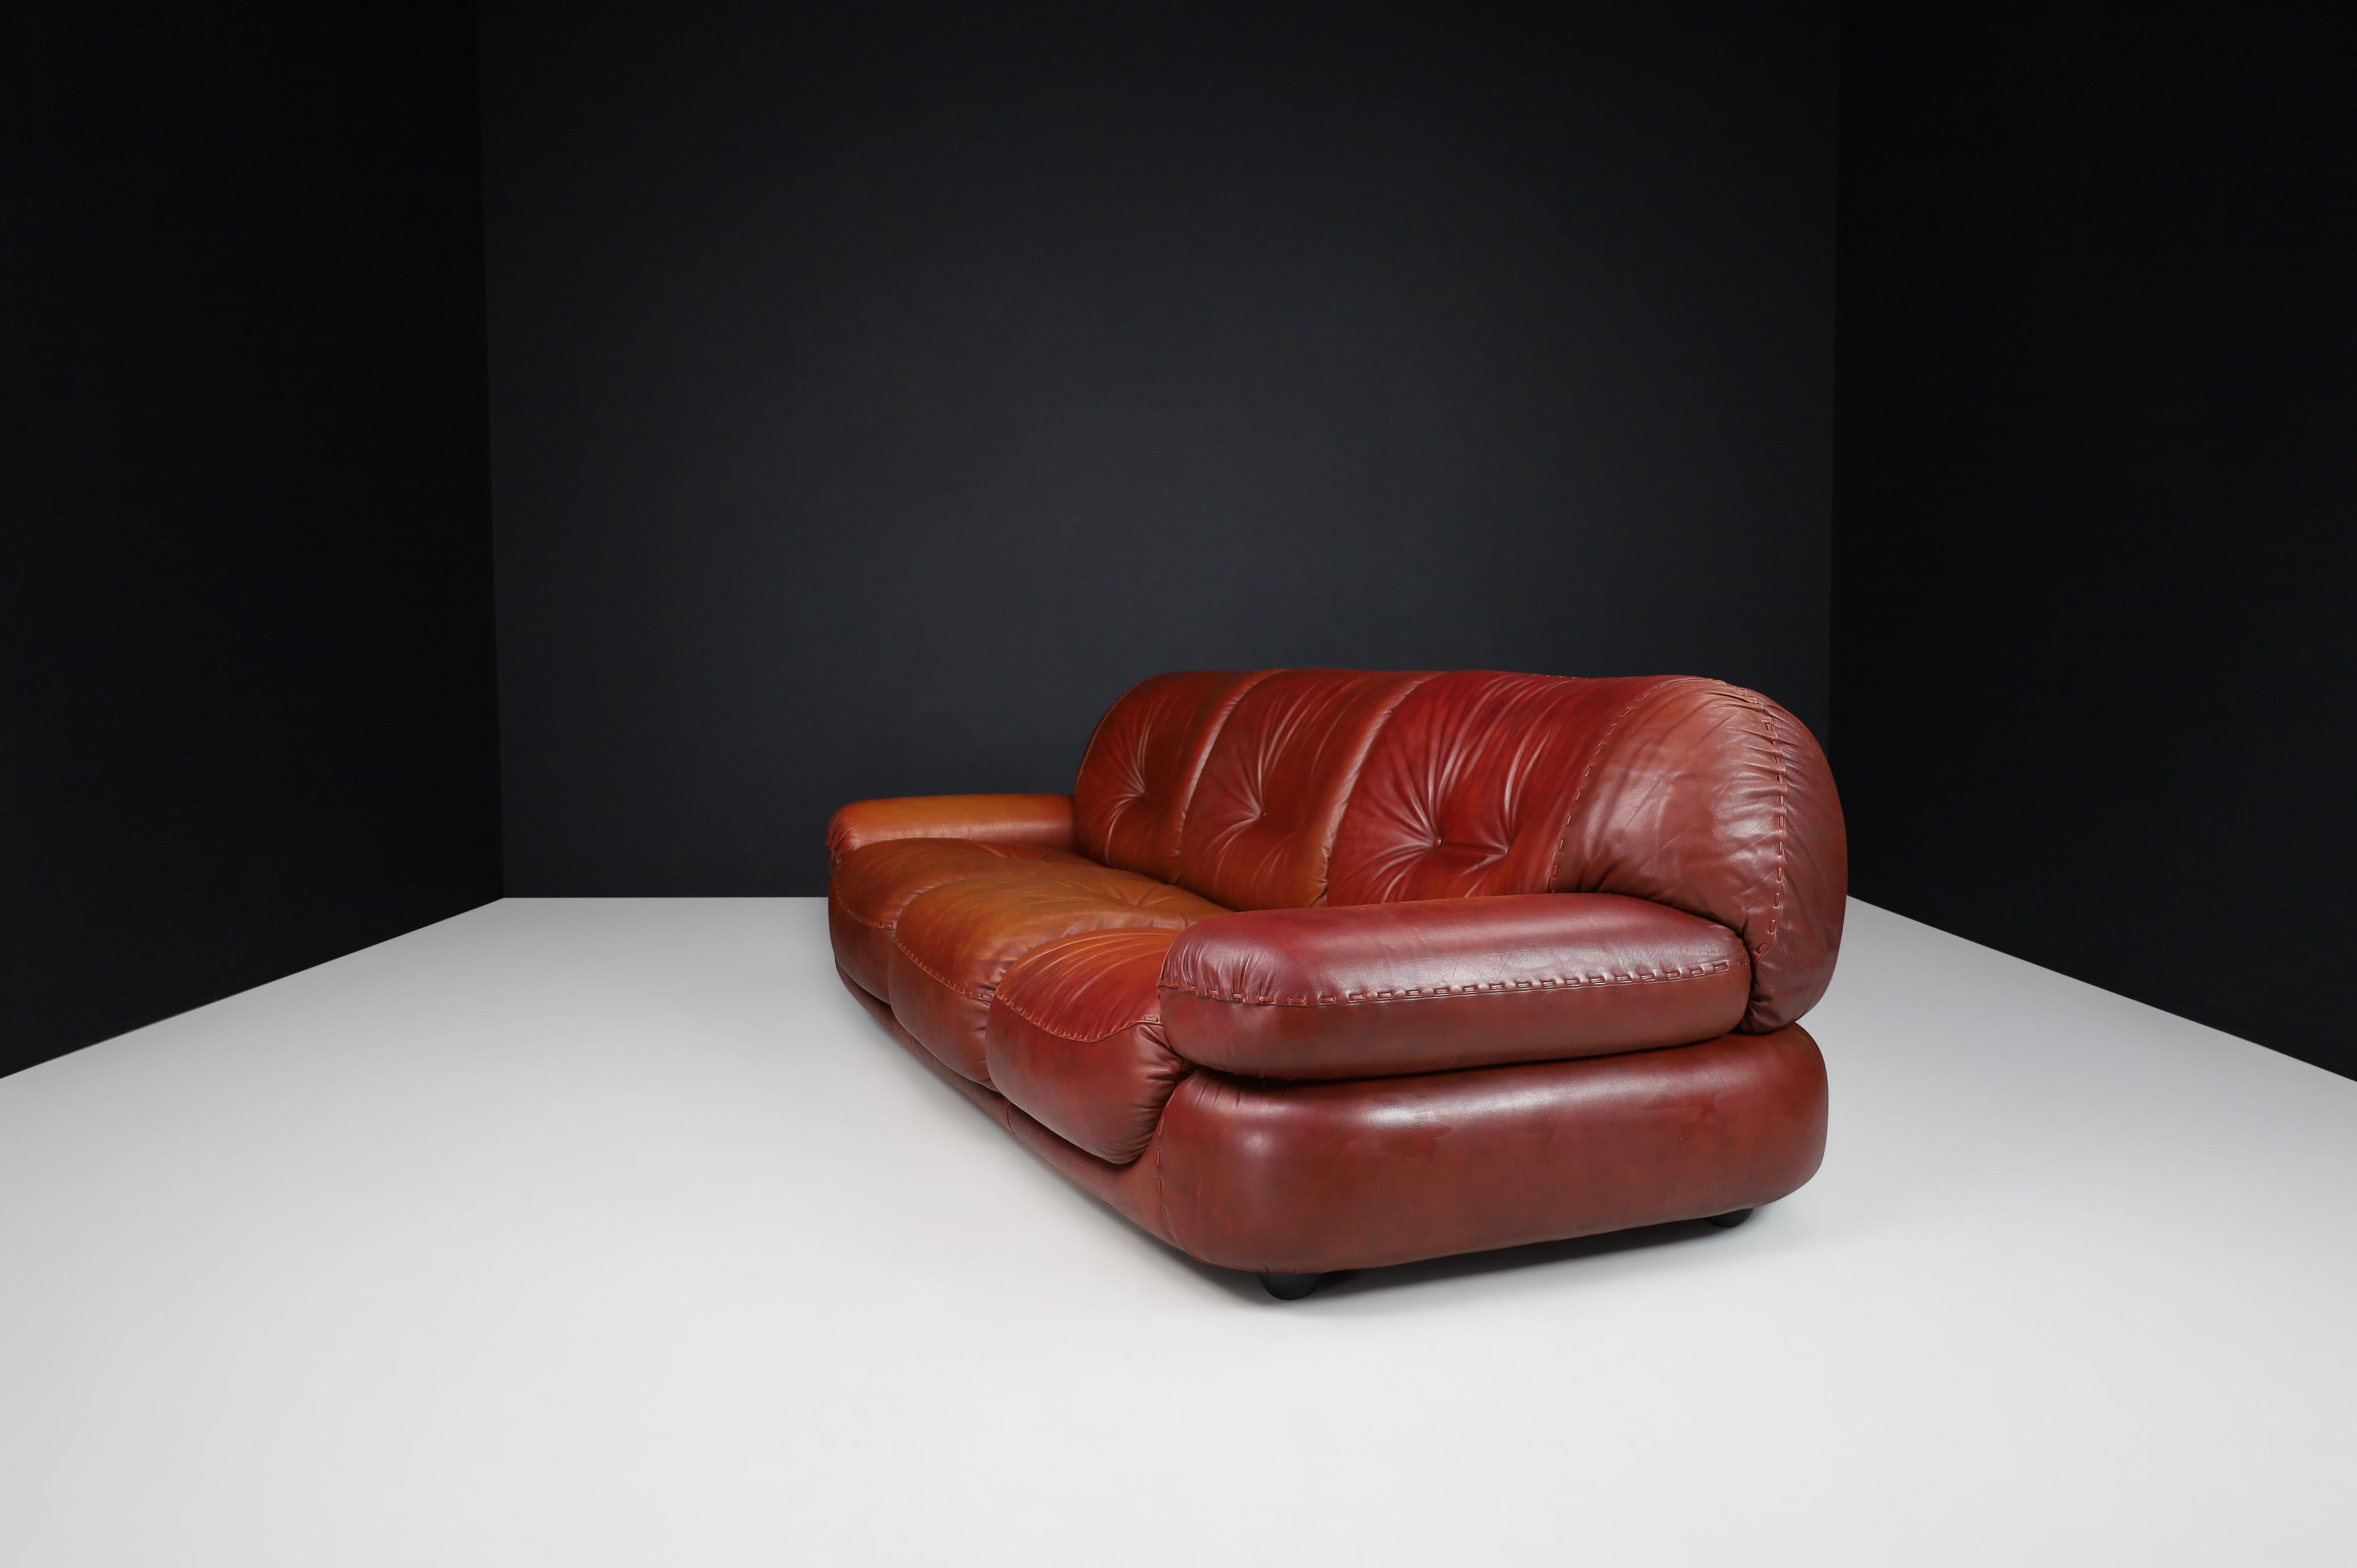 Large Lounge Sofa in Firebrick Leather by Sapporo for Mobil Girgi, Italy, 1970 For Sale 1